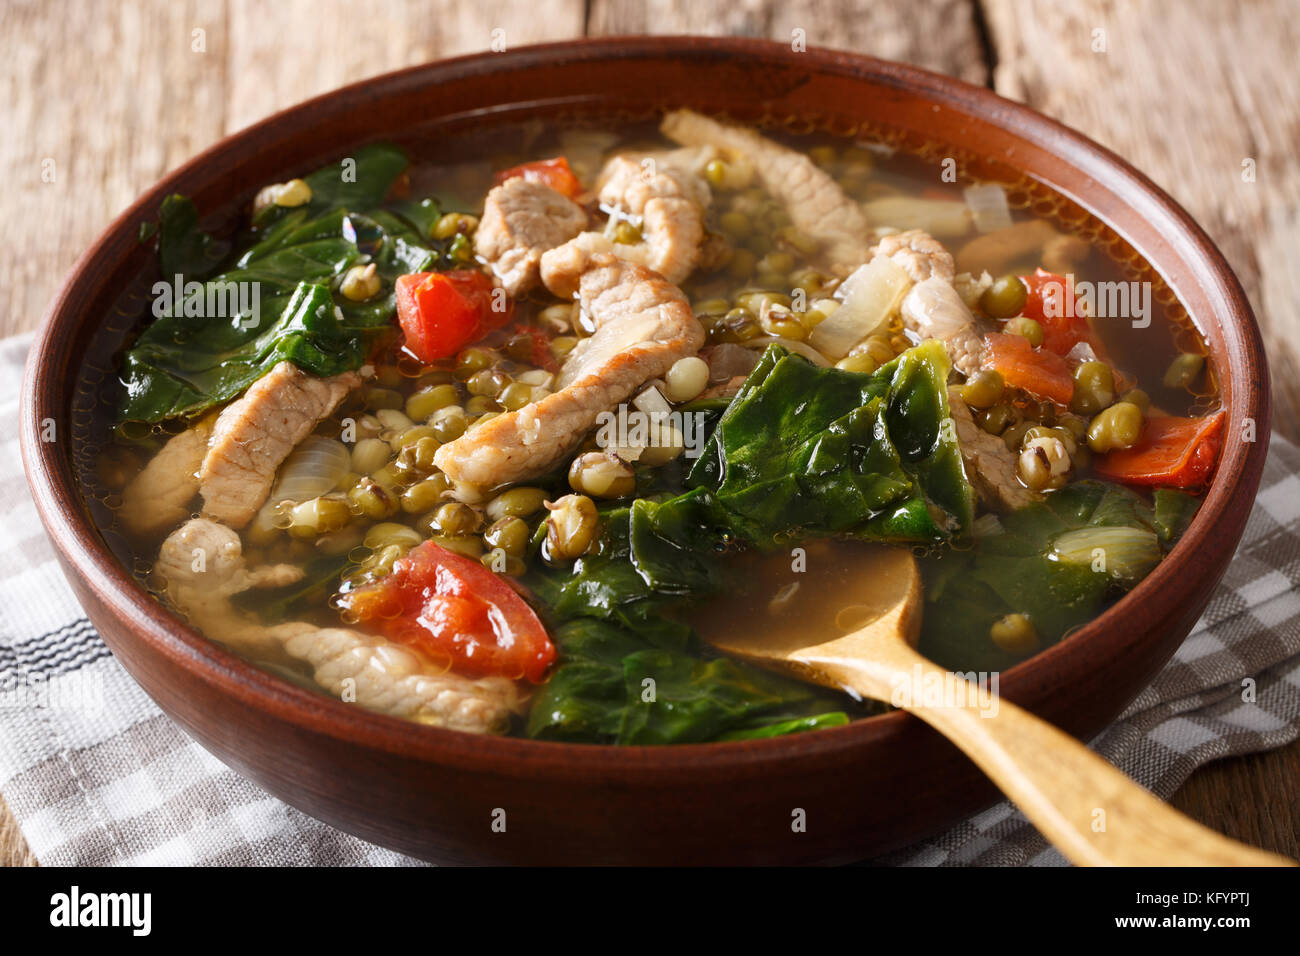 Philippine food: Mung beans soup close-up in a bowl on the table. horizontal Stock Photo